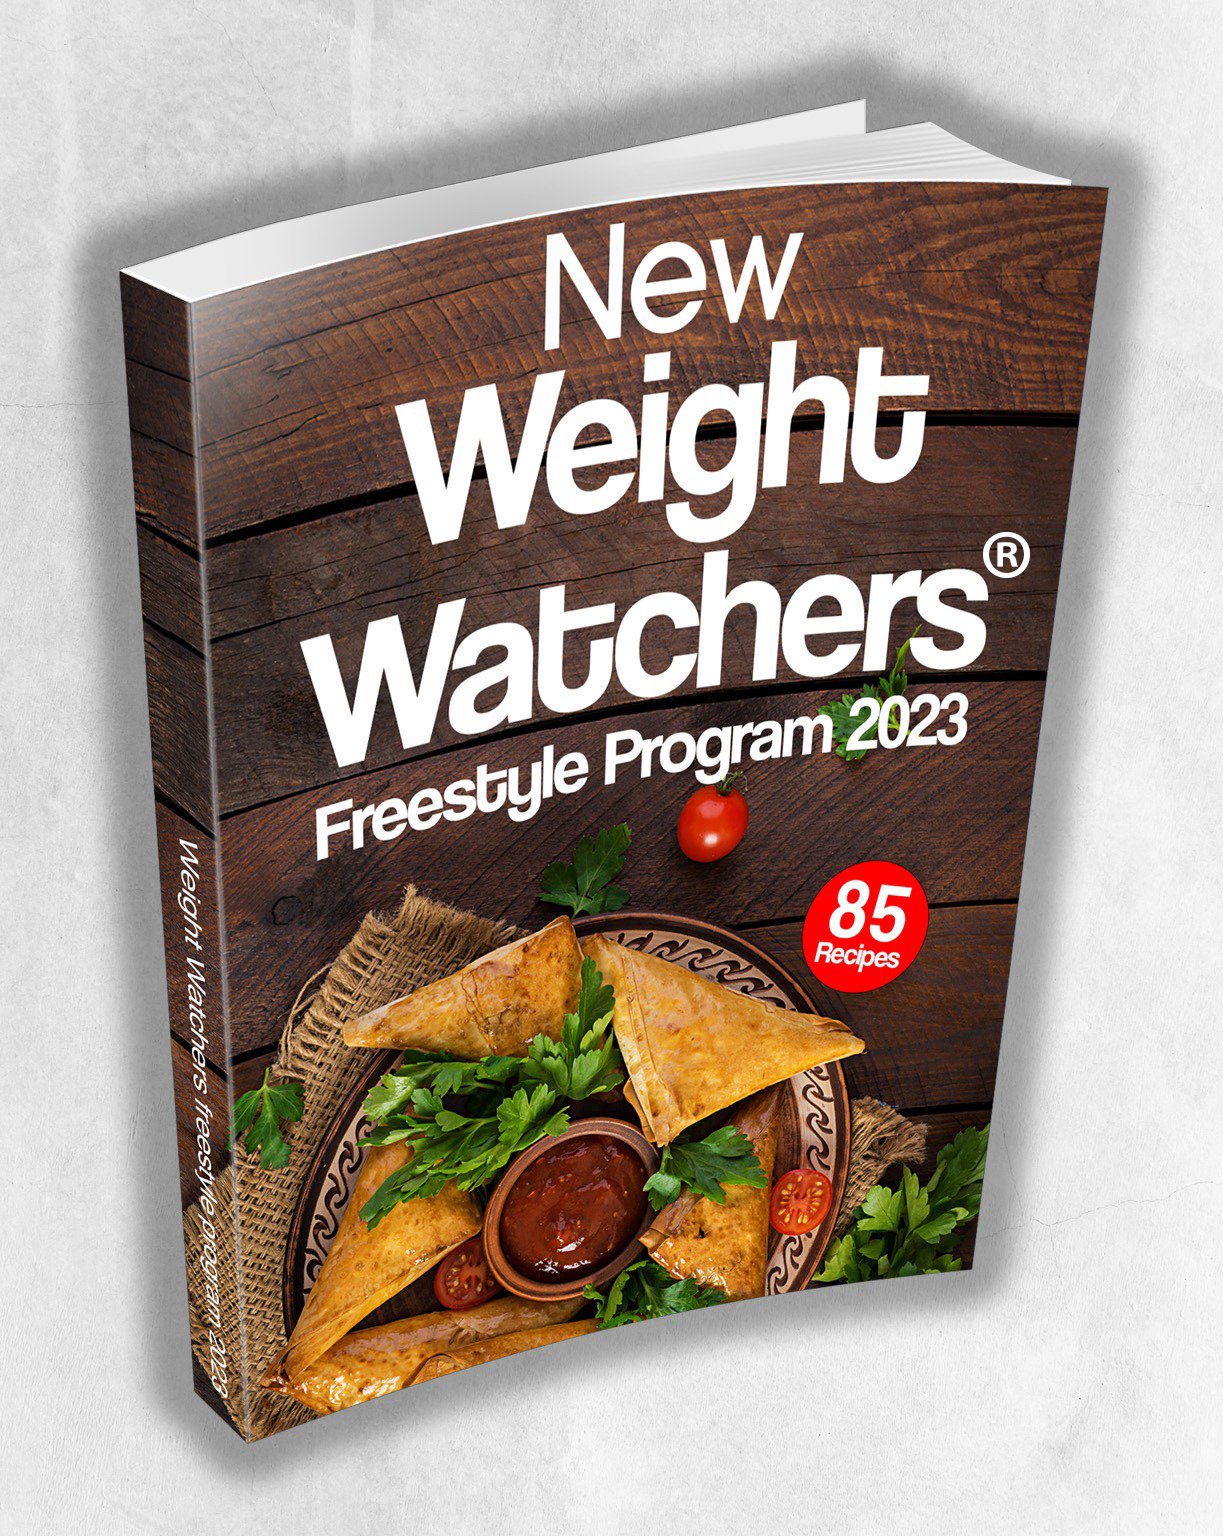 Weight Watchers Changes Name to WW: What's Changing About the Program